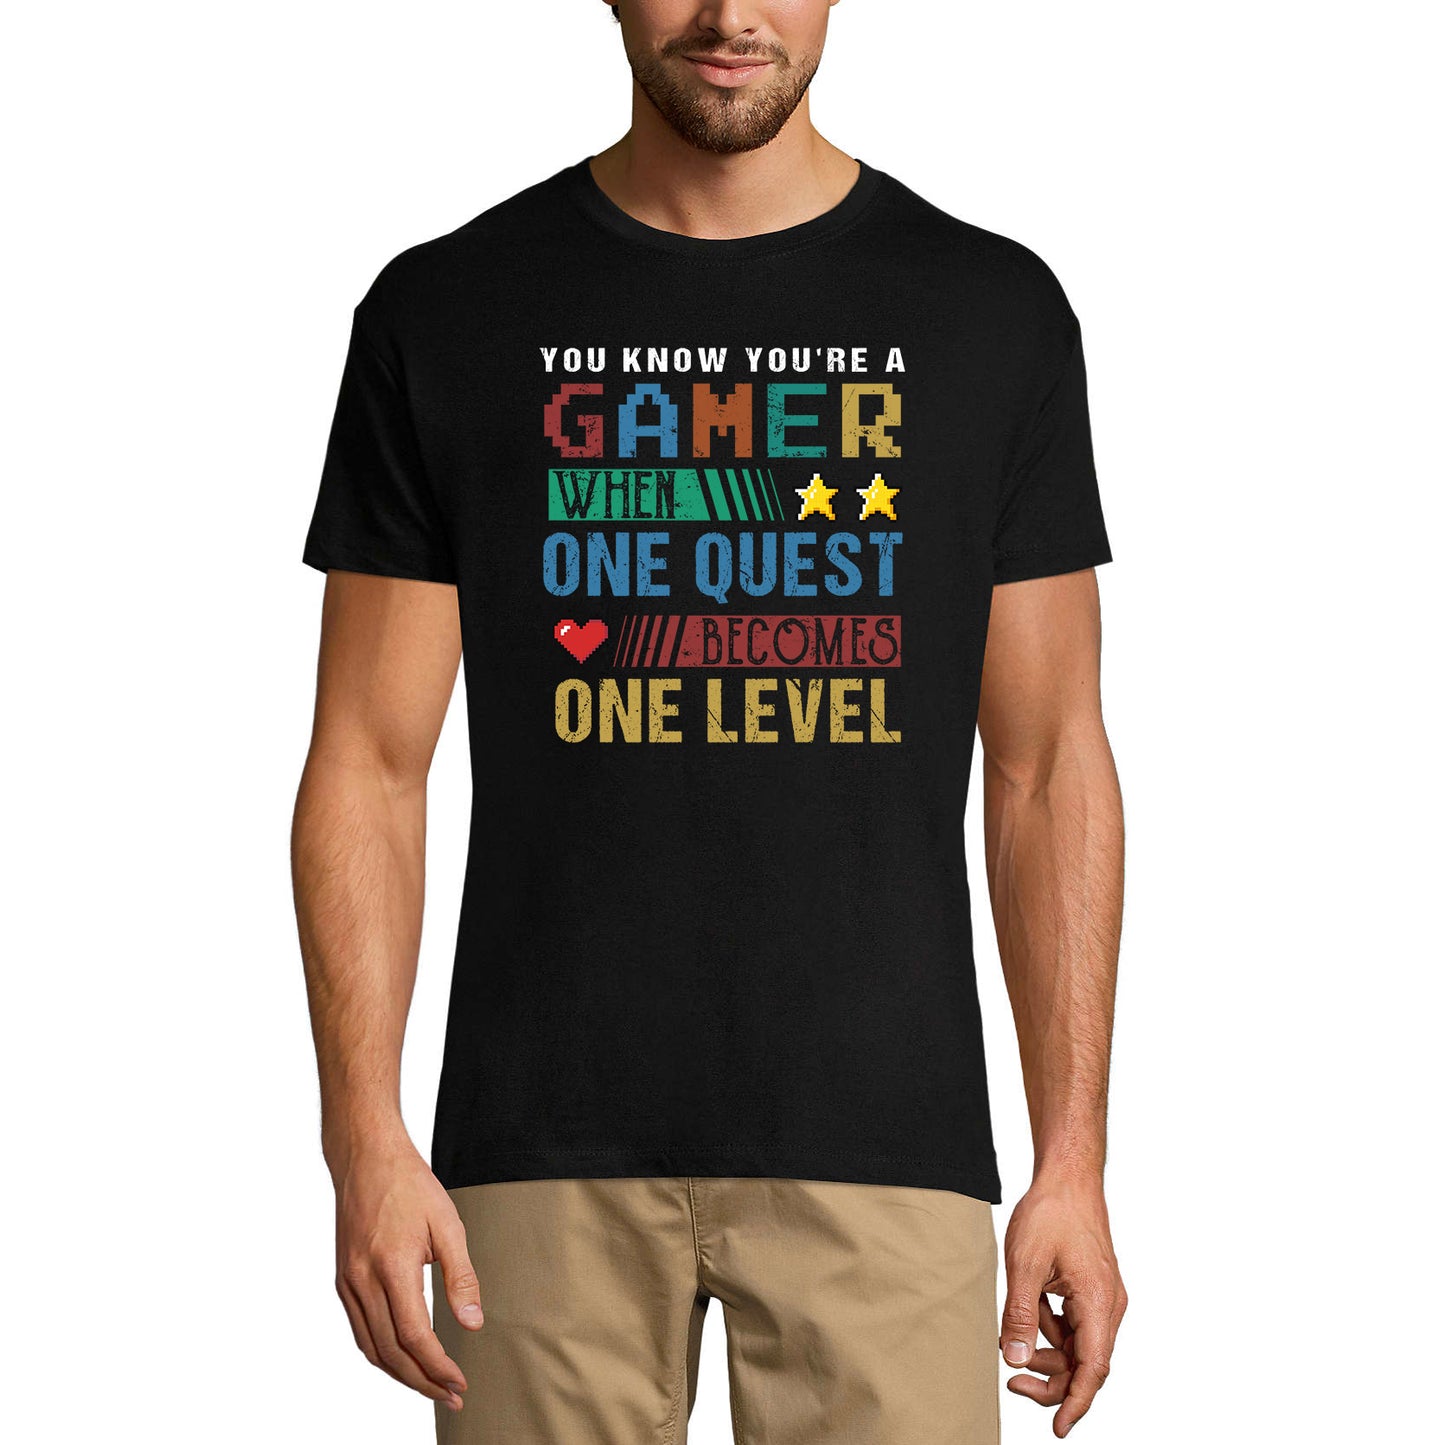 ULTRABASIC Men's T-Shirt One Quest Becomes One Level - Gaming Quote - Joke Tee